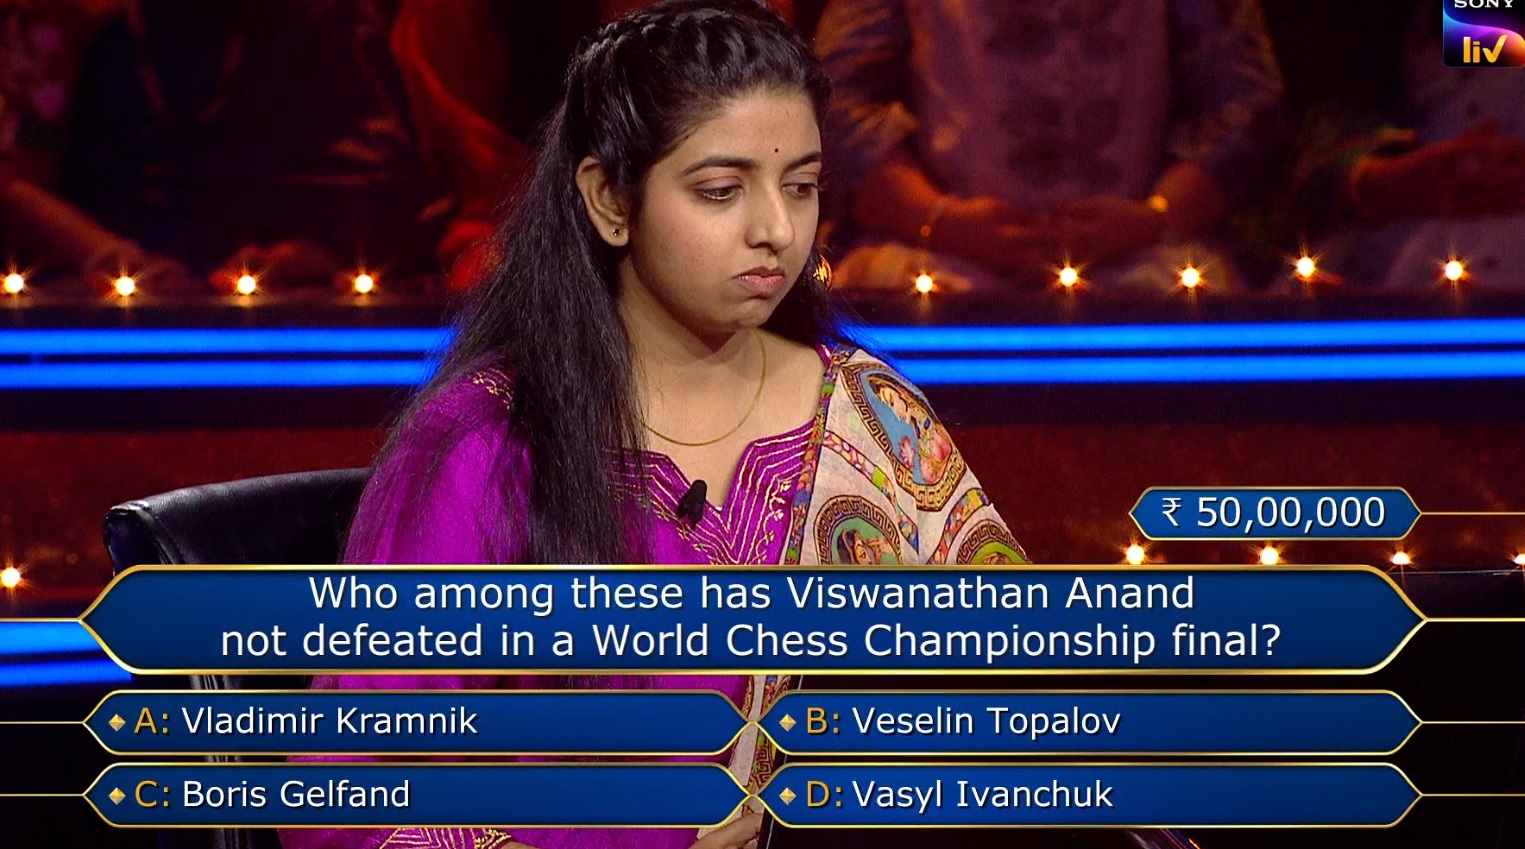 Ques : Who among these has Viswanathan Anand not defeated in a World Chess Championship final?